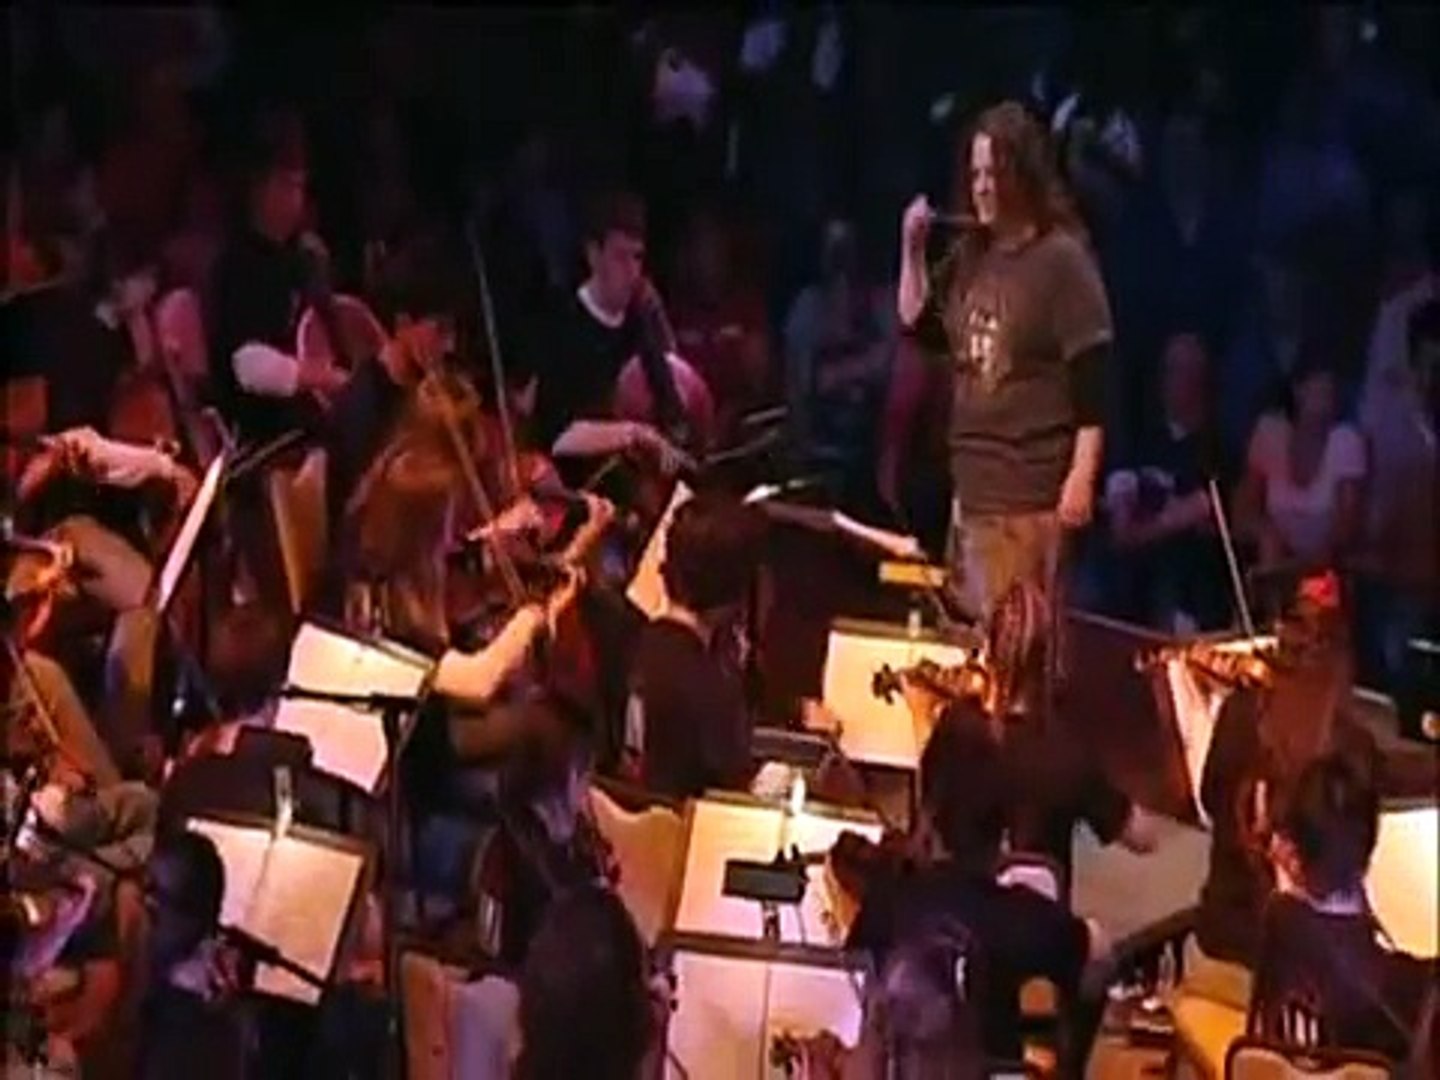 Styx & The Contemporary Youth Orchestra - I Am The Walrus (The Beatles)